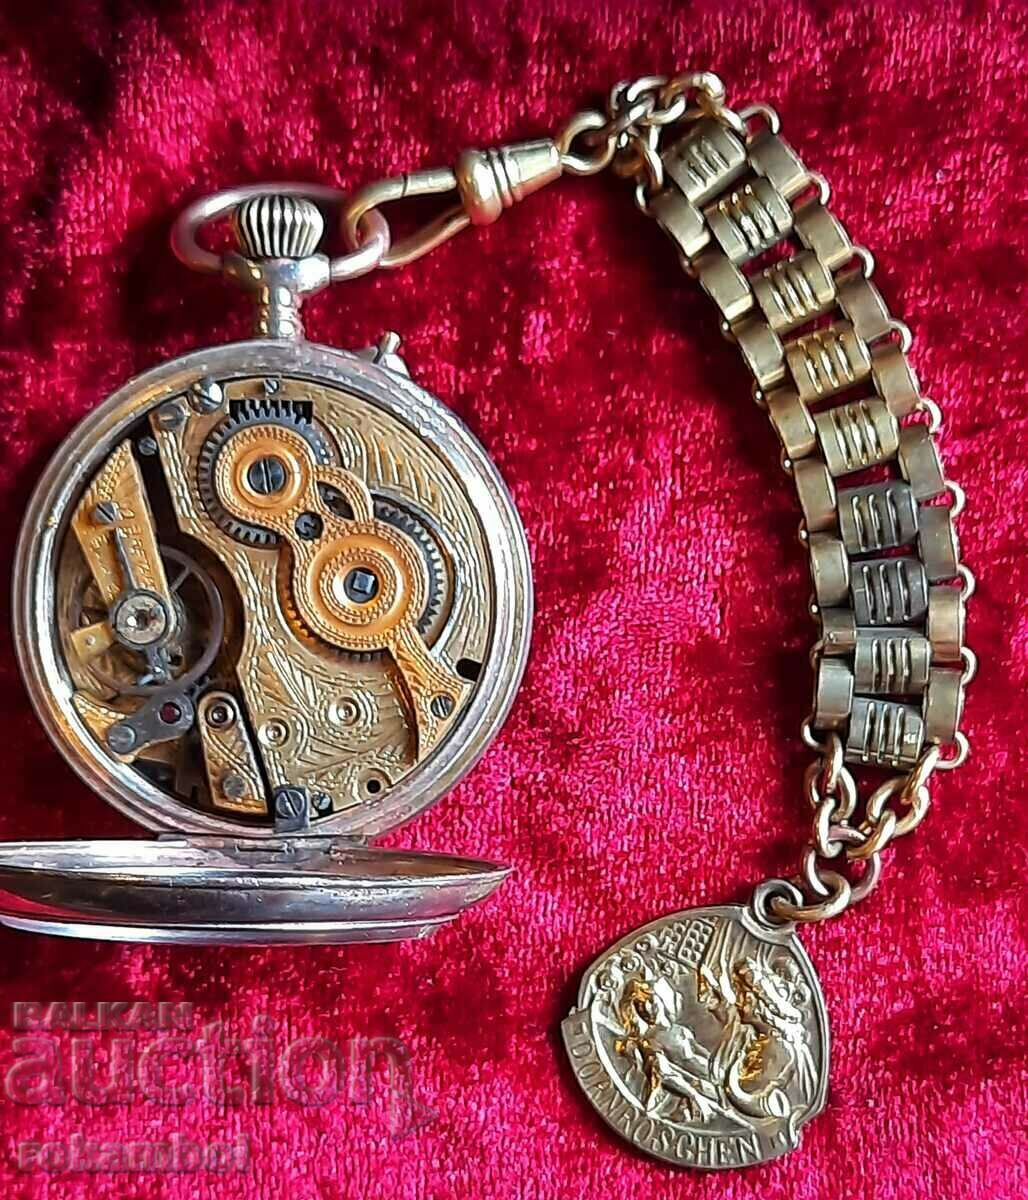 Antique Swiss Engraved Pocket Watch